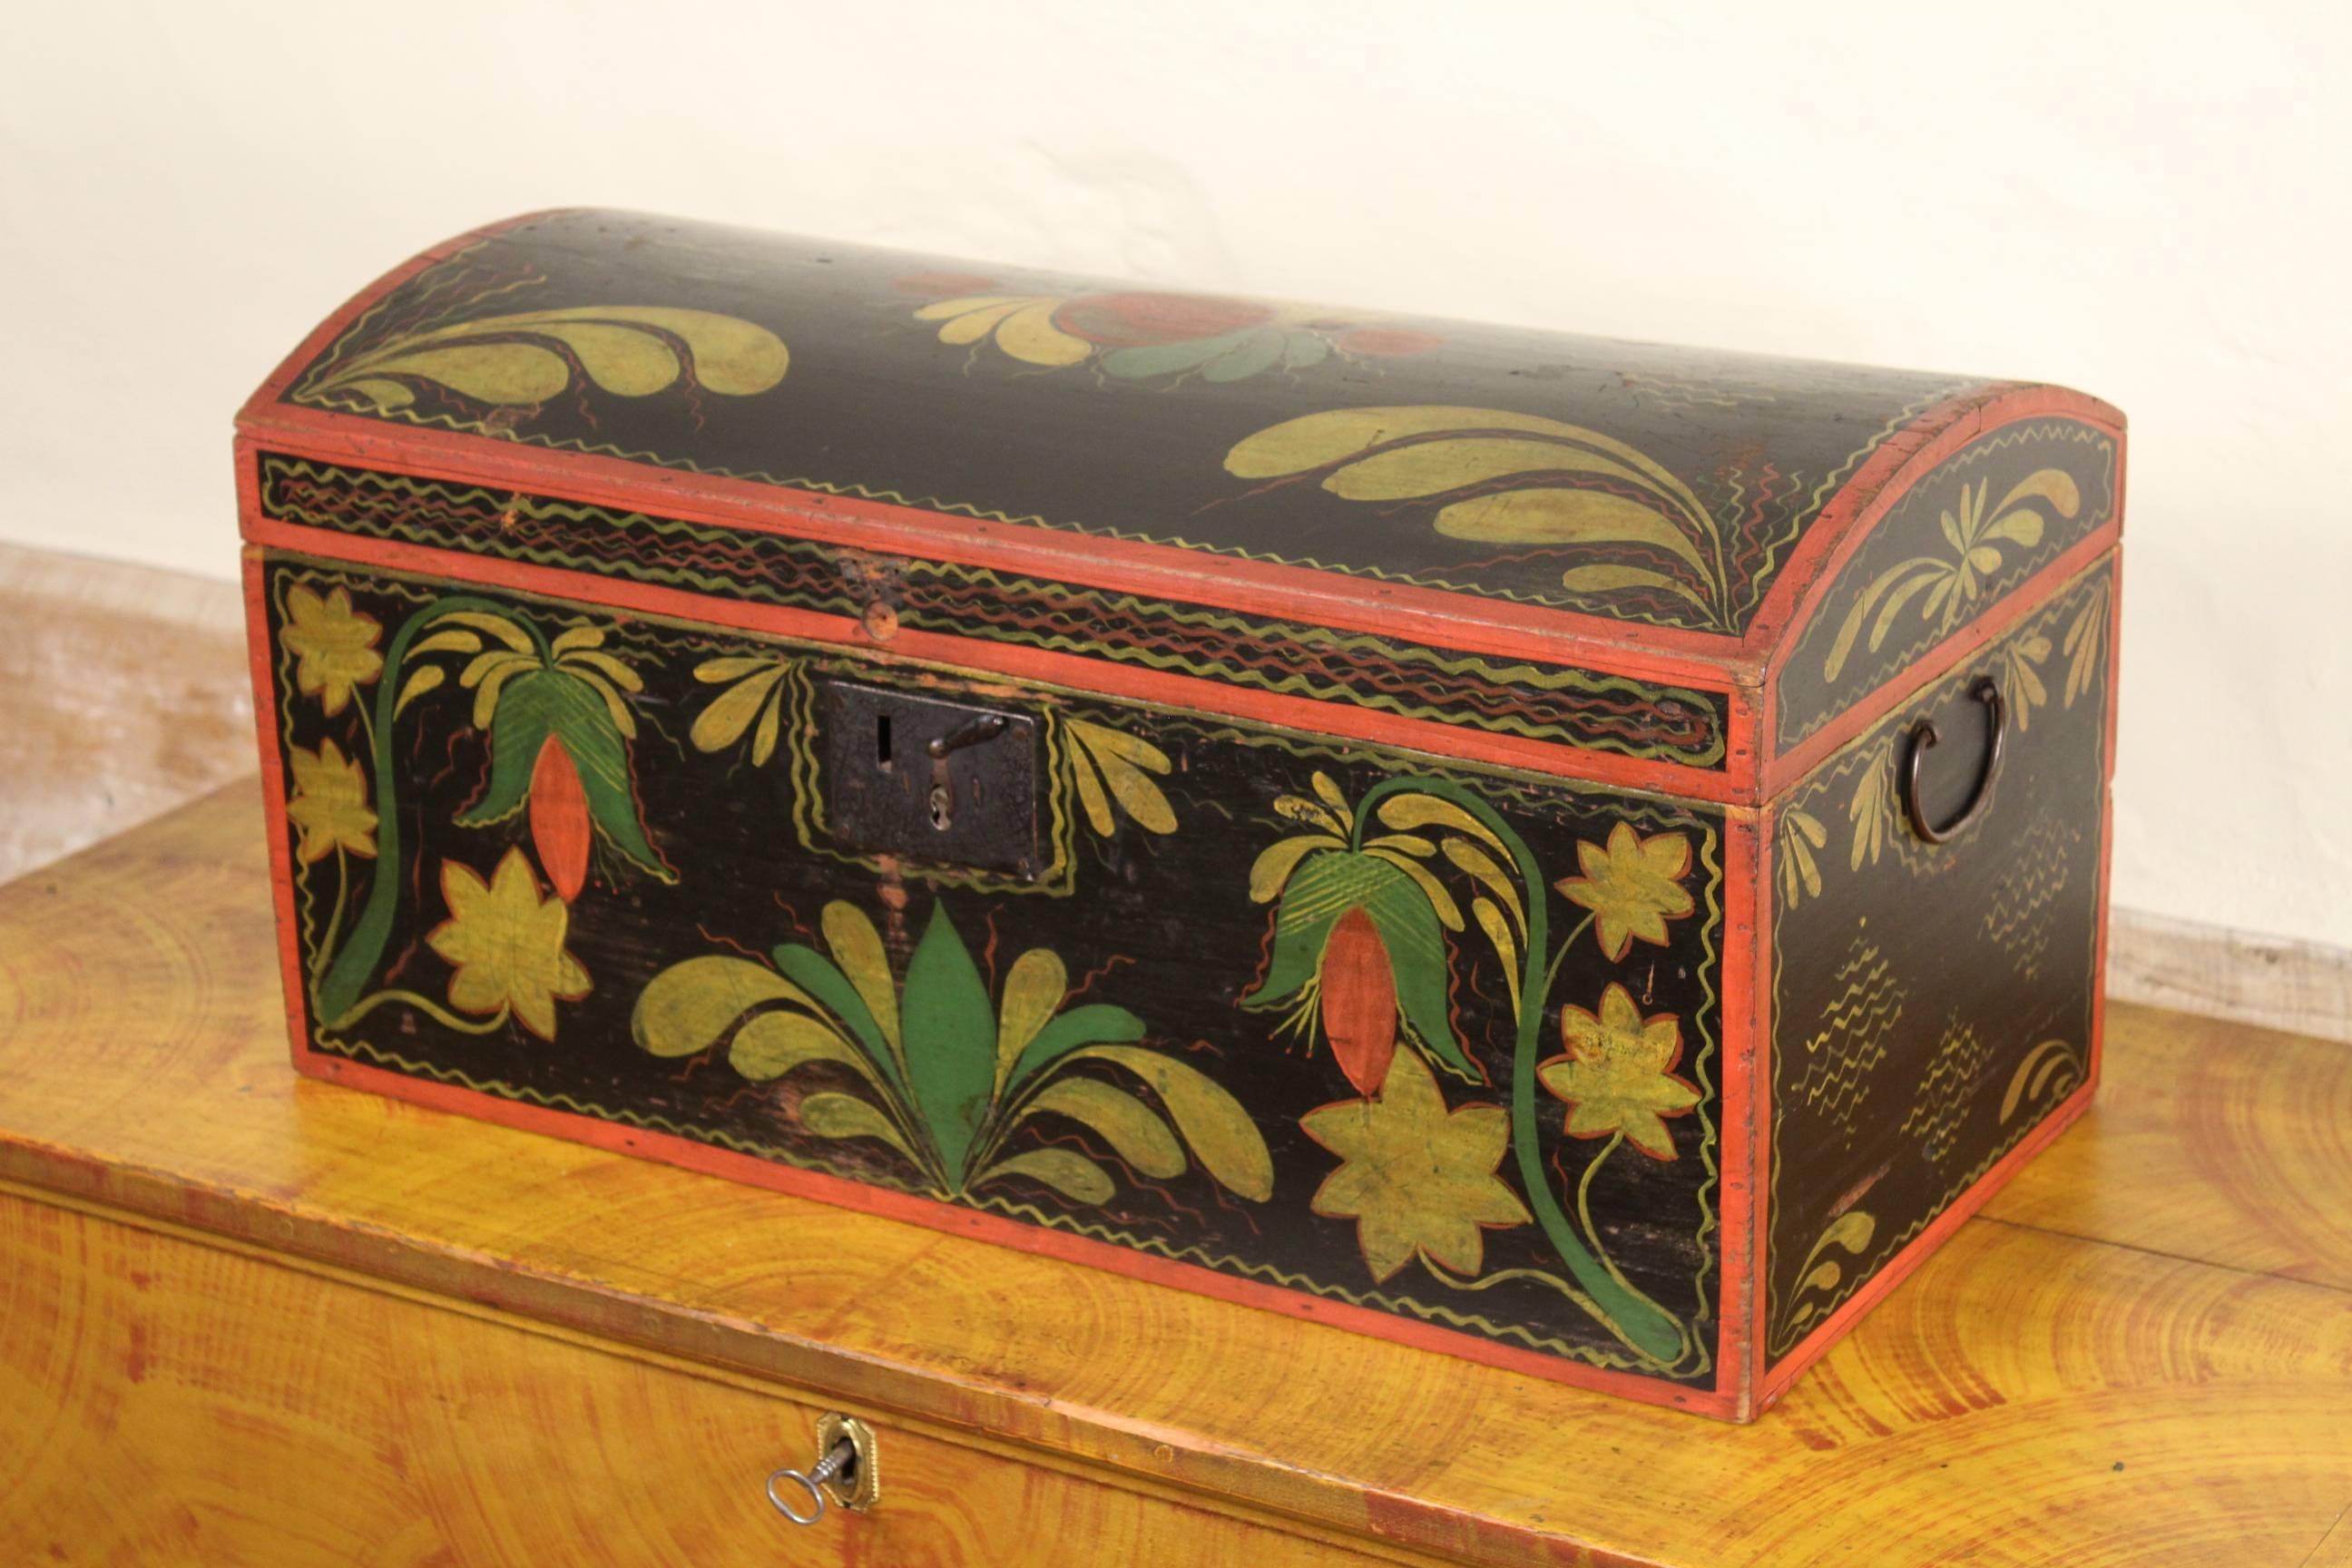 A dome-top trunk, probably from Rhode Island, featuring its original red, green and yellow floral and foliate decoration on a black ground. The interior retains its original lining composed of newspapers from Rhode Island dated "1827".